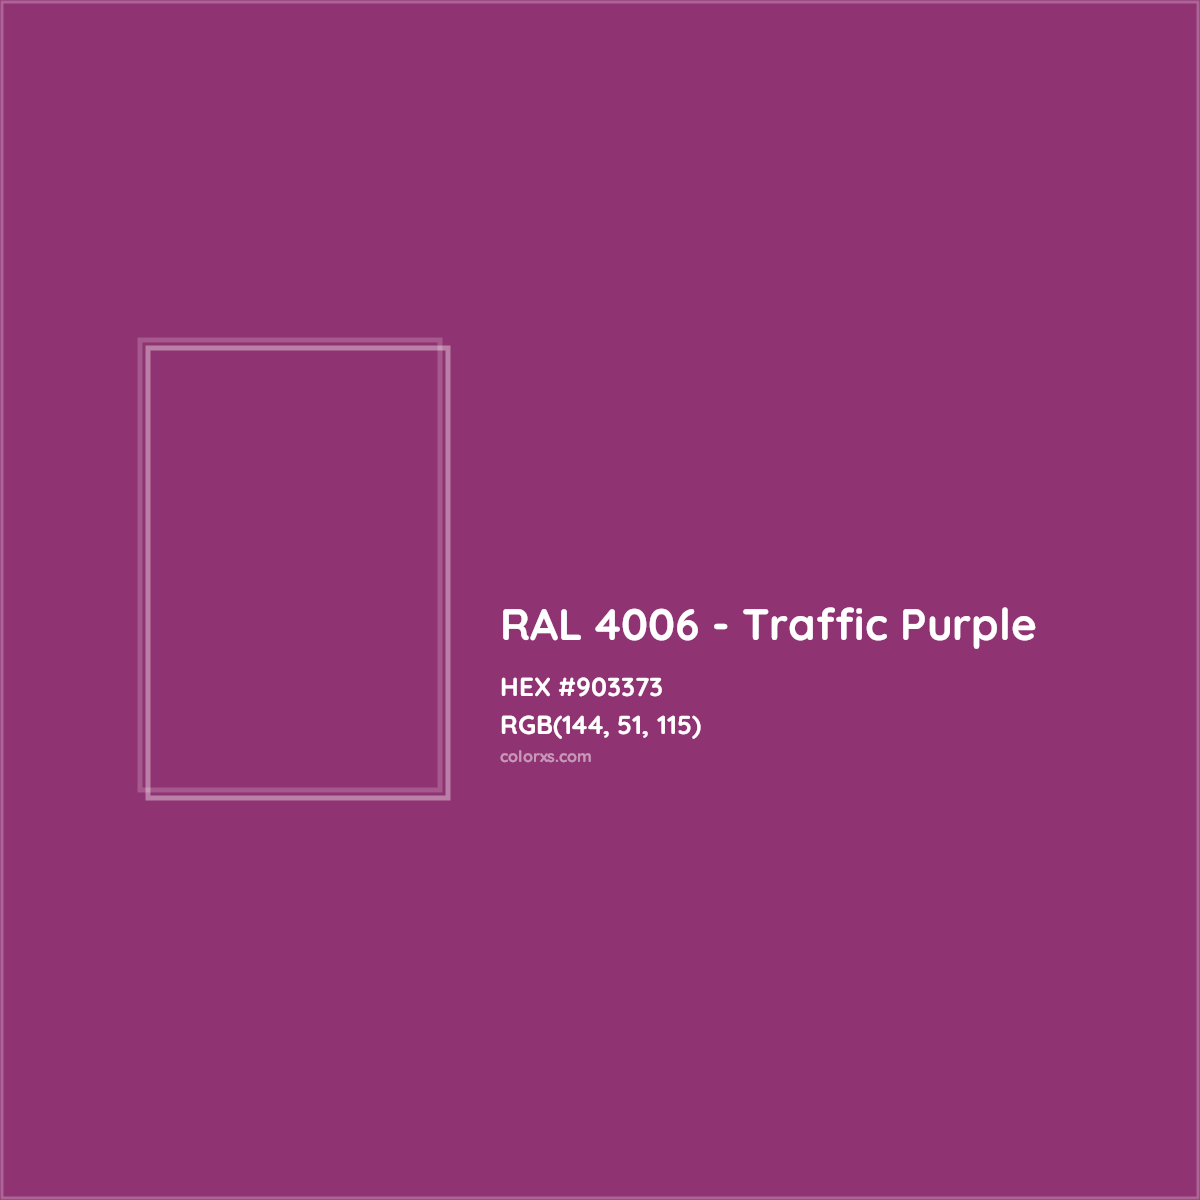 HEX #903373 RAL 4006 - Traffic Purple CMS RAL Classic - Color Code